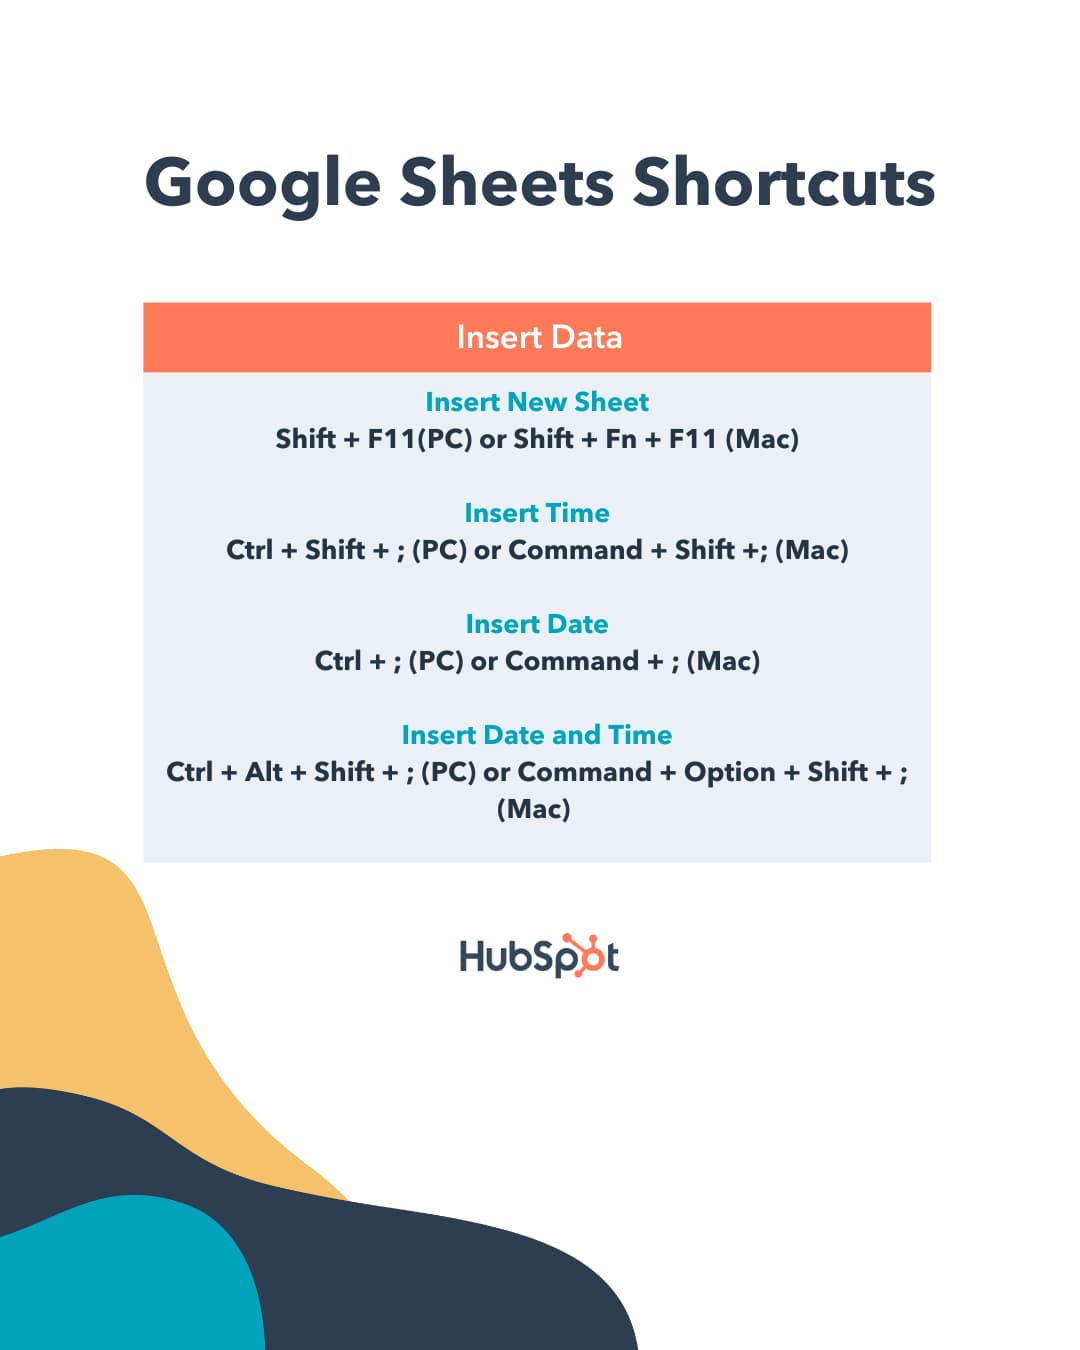 Use Google Spreadsheets shortcuts to insert a new sheet, insert time, insert date, and insert date and time 